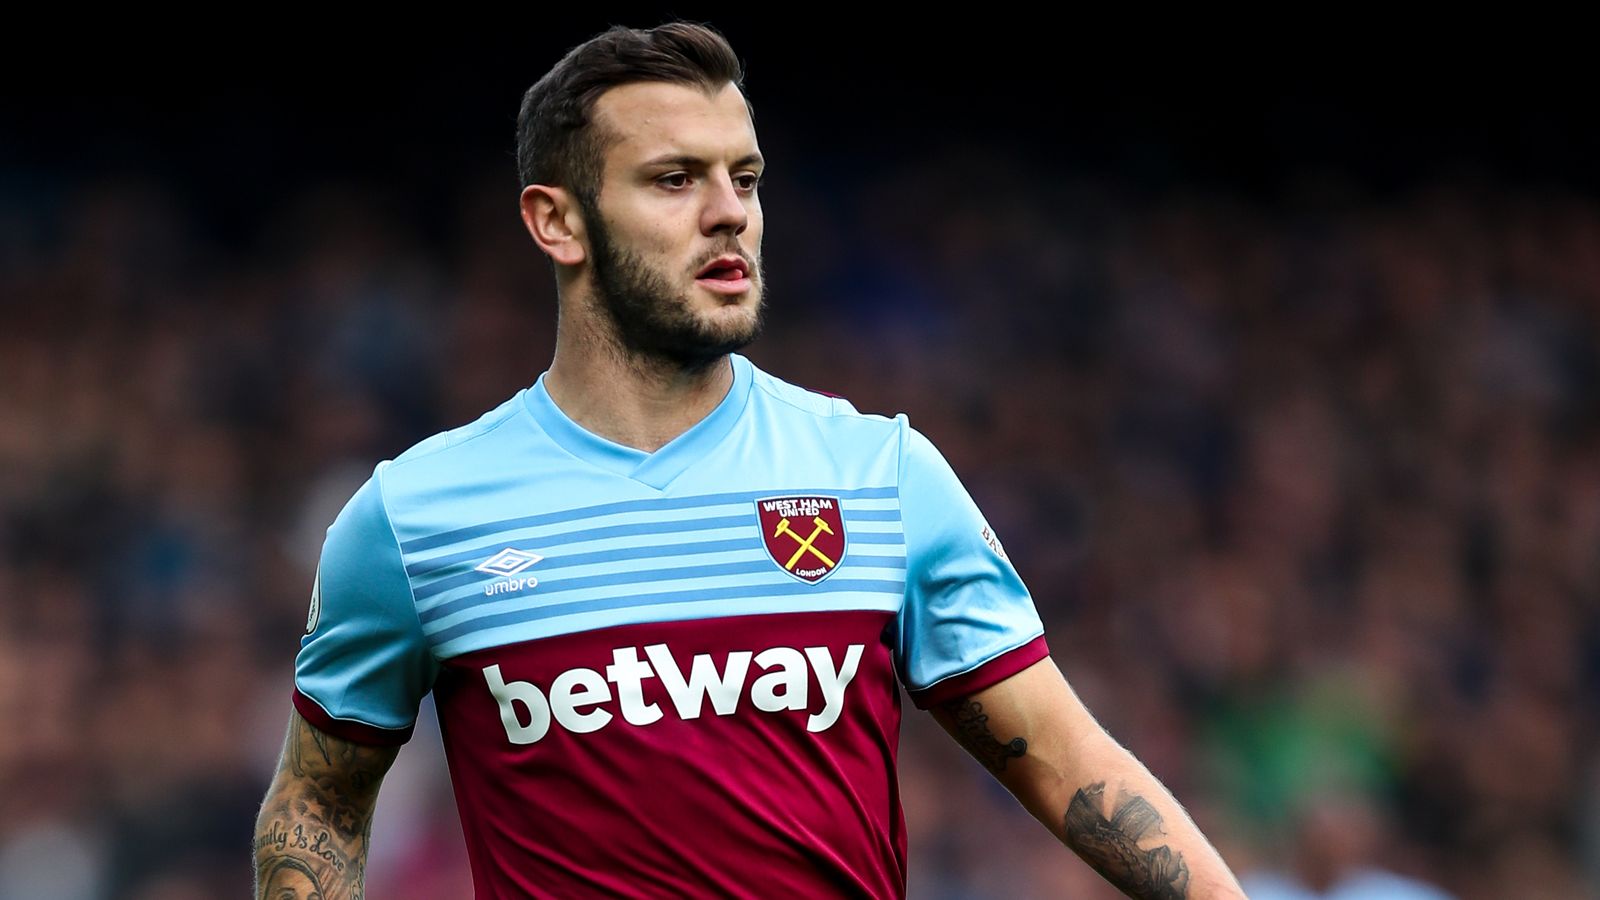 jack-wilshere-has-west-ham-contract-terminated-by-mutual-consent